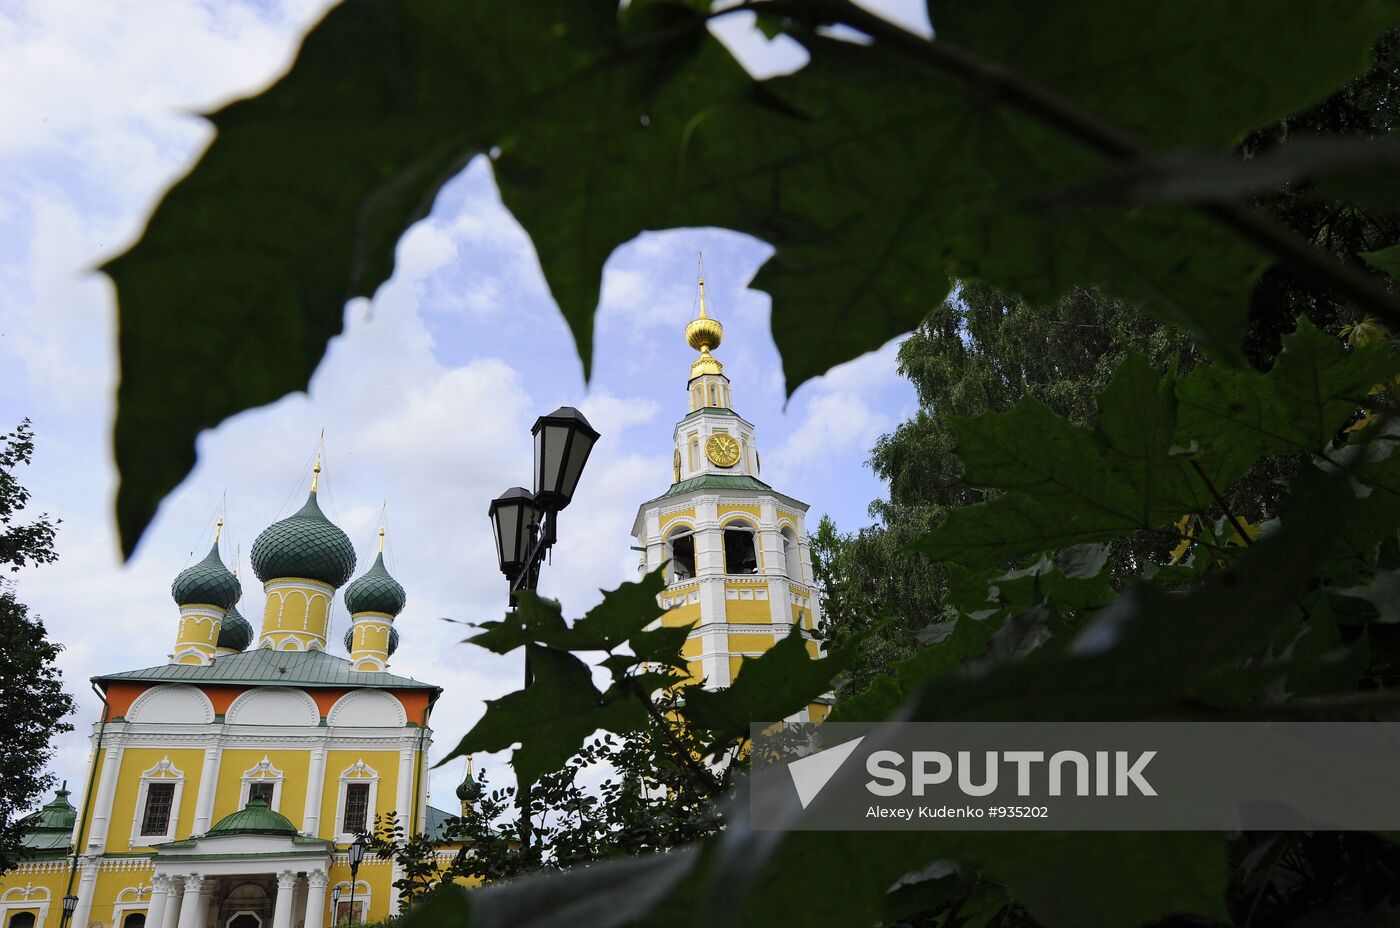 Russian towns. Uglich